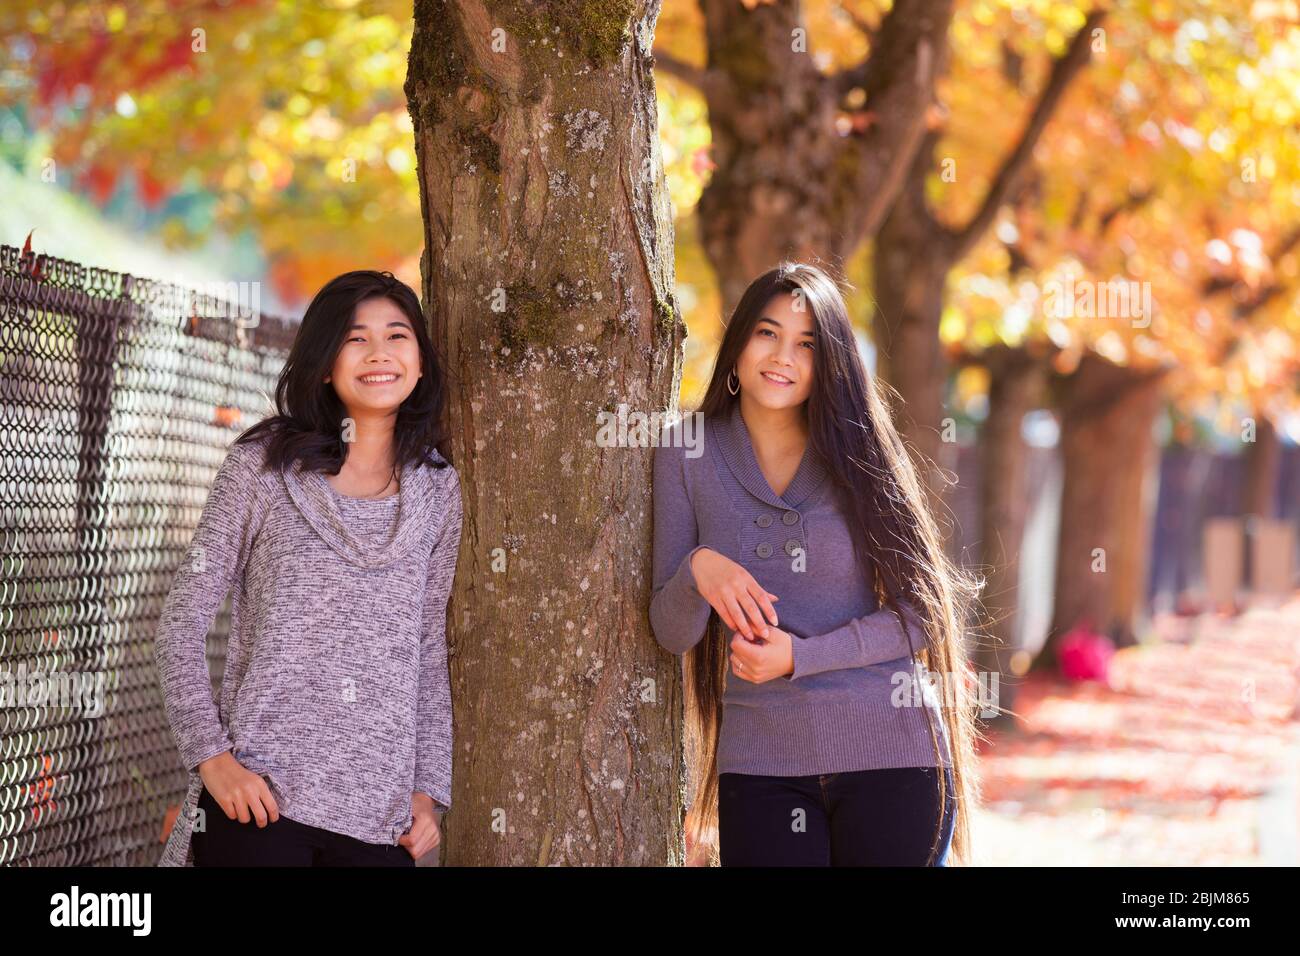 Two biracial teen girls or young women standing next to maple tree with colorful autumn leaves Stock Photo